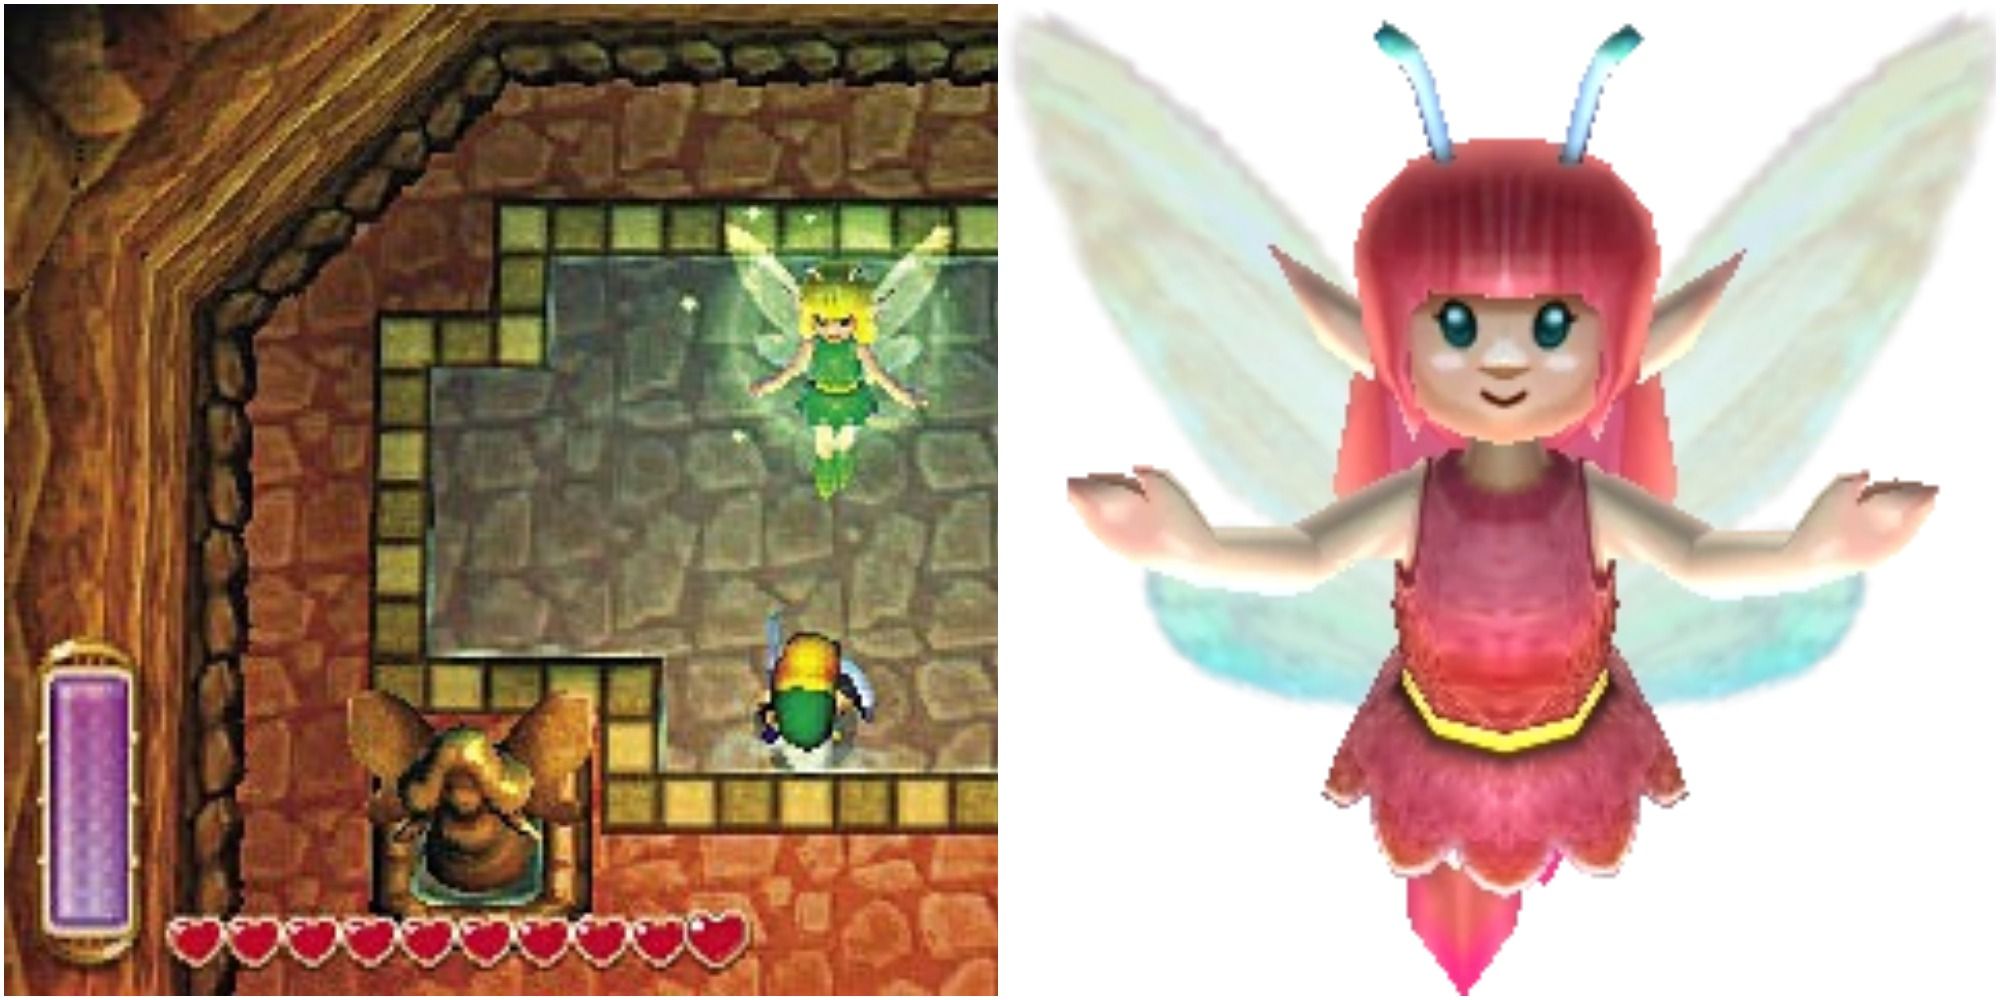 Split image of a screenshot of Link visiting a Great Fairy Fountain and a close-up shot of the Great Rupee Fairy.